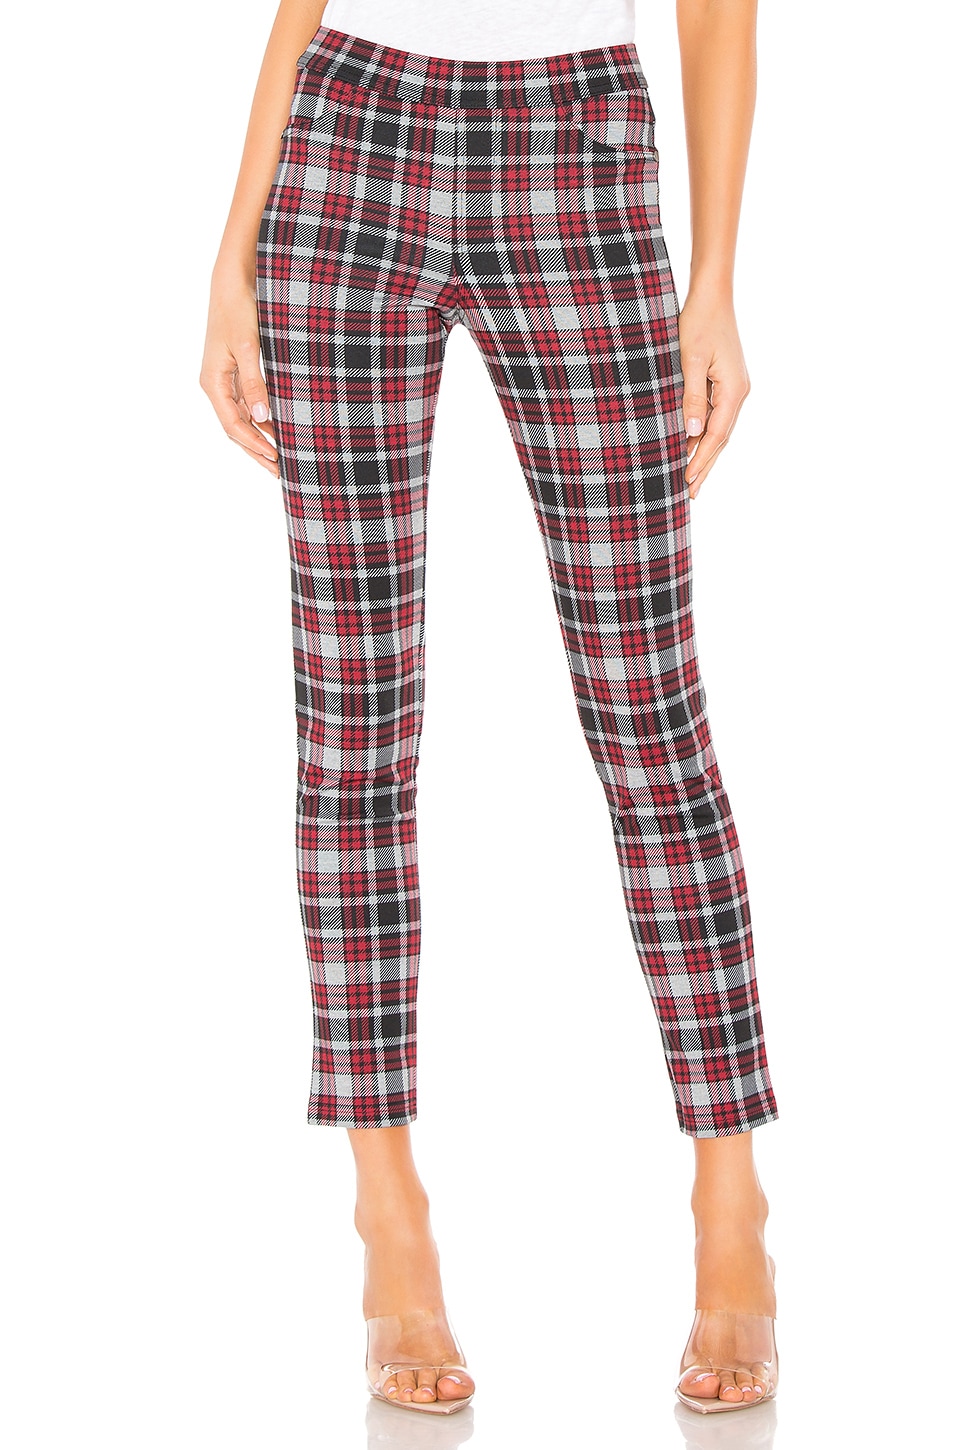 Chaser Skinny Pants in Red Plaid | REVOLVE